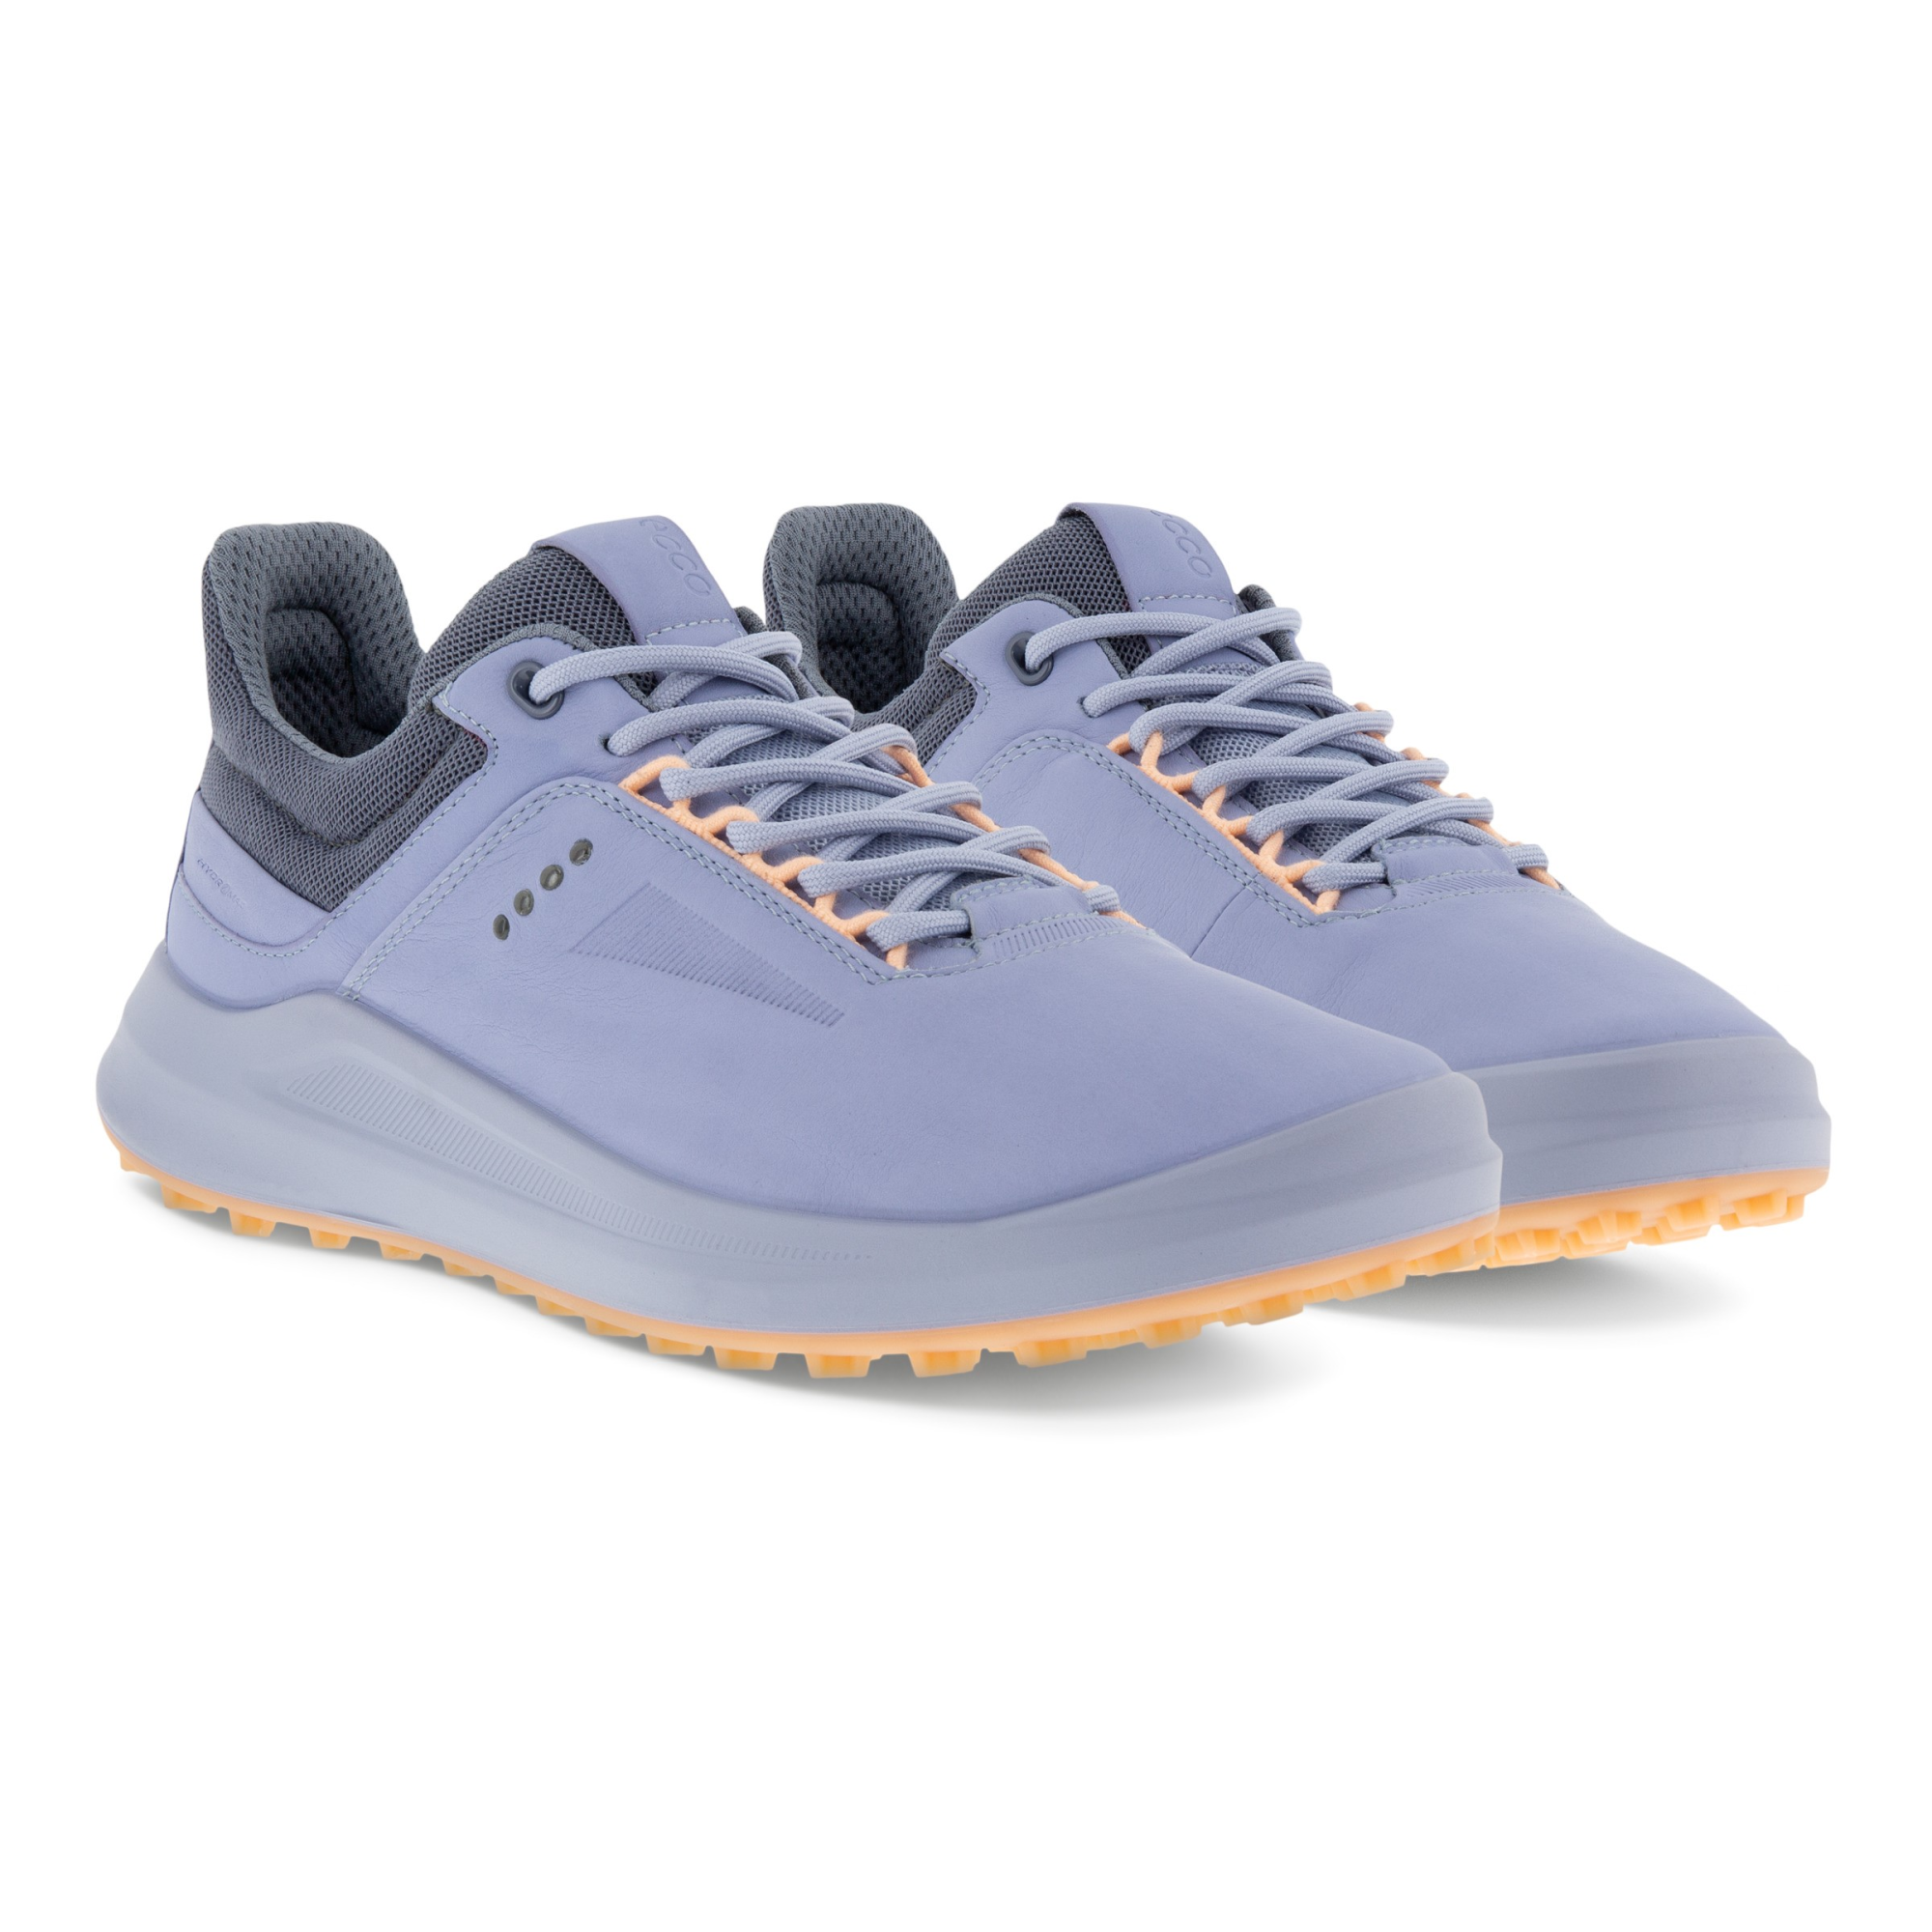 Ecco W GOLF CORE GOLF SHOE 39 - Products - Veryk Mall - Veryk product, quick response, safe your money!